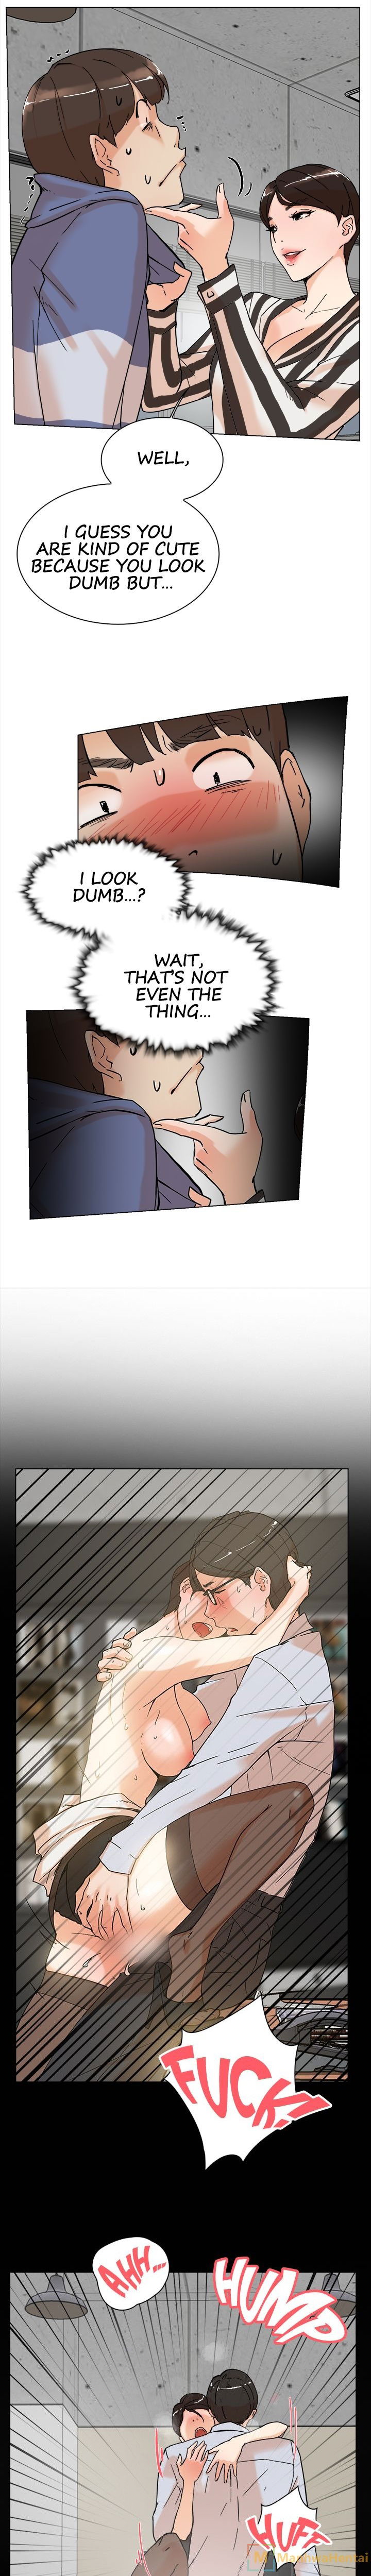 office-affairs-chap-3-5